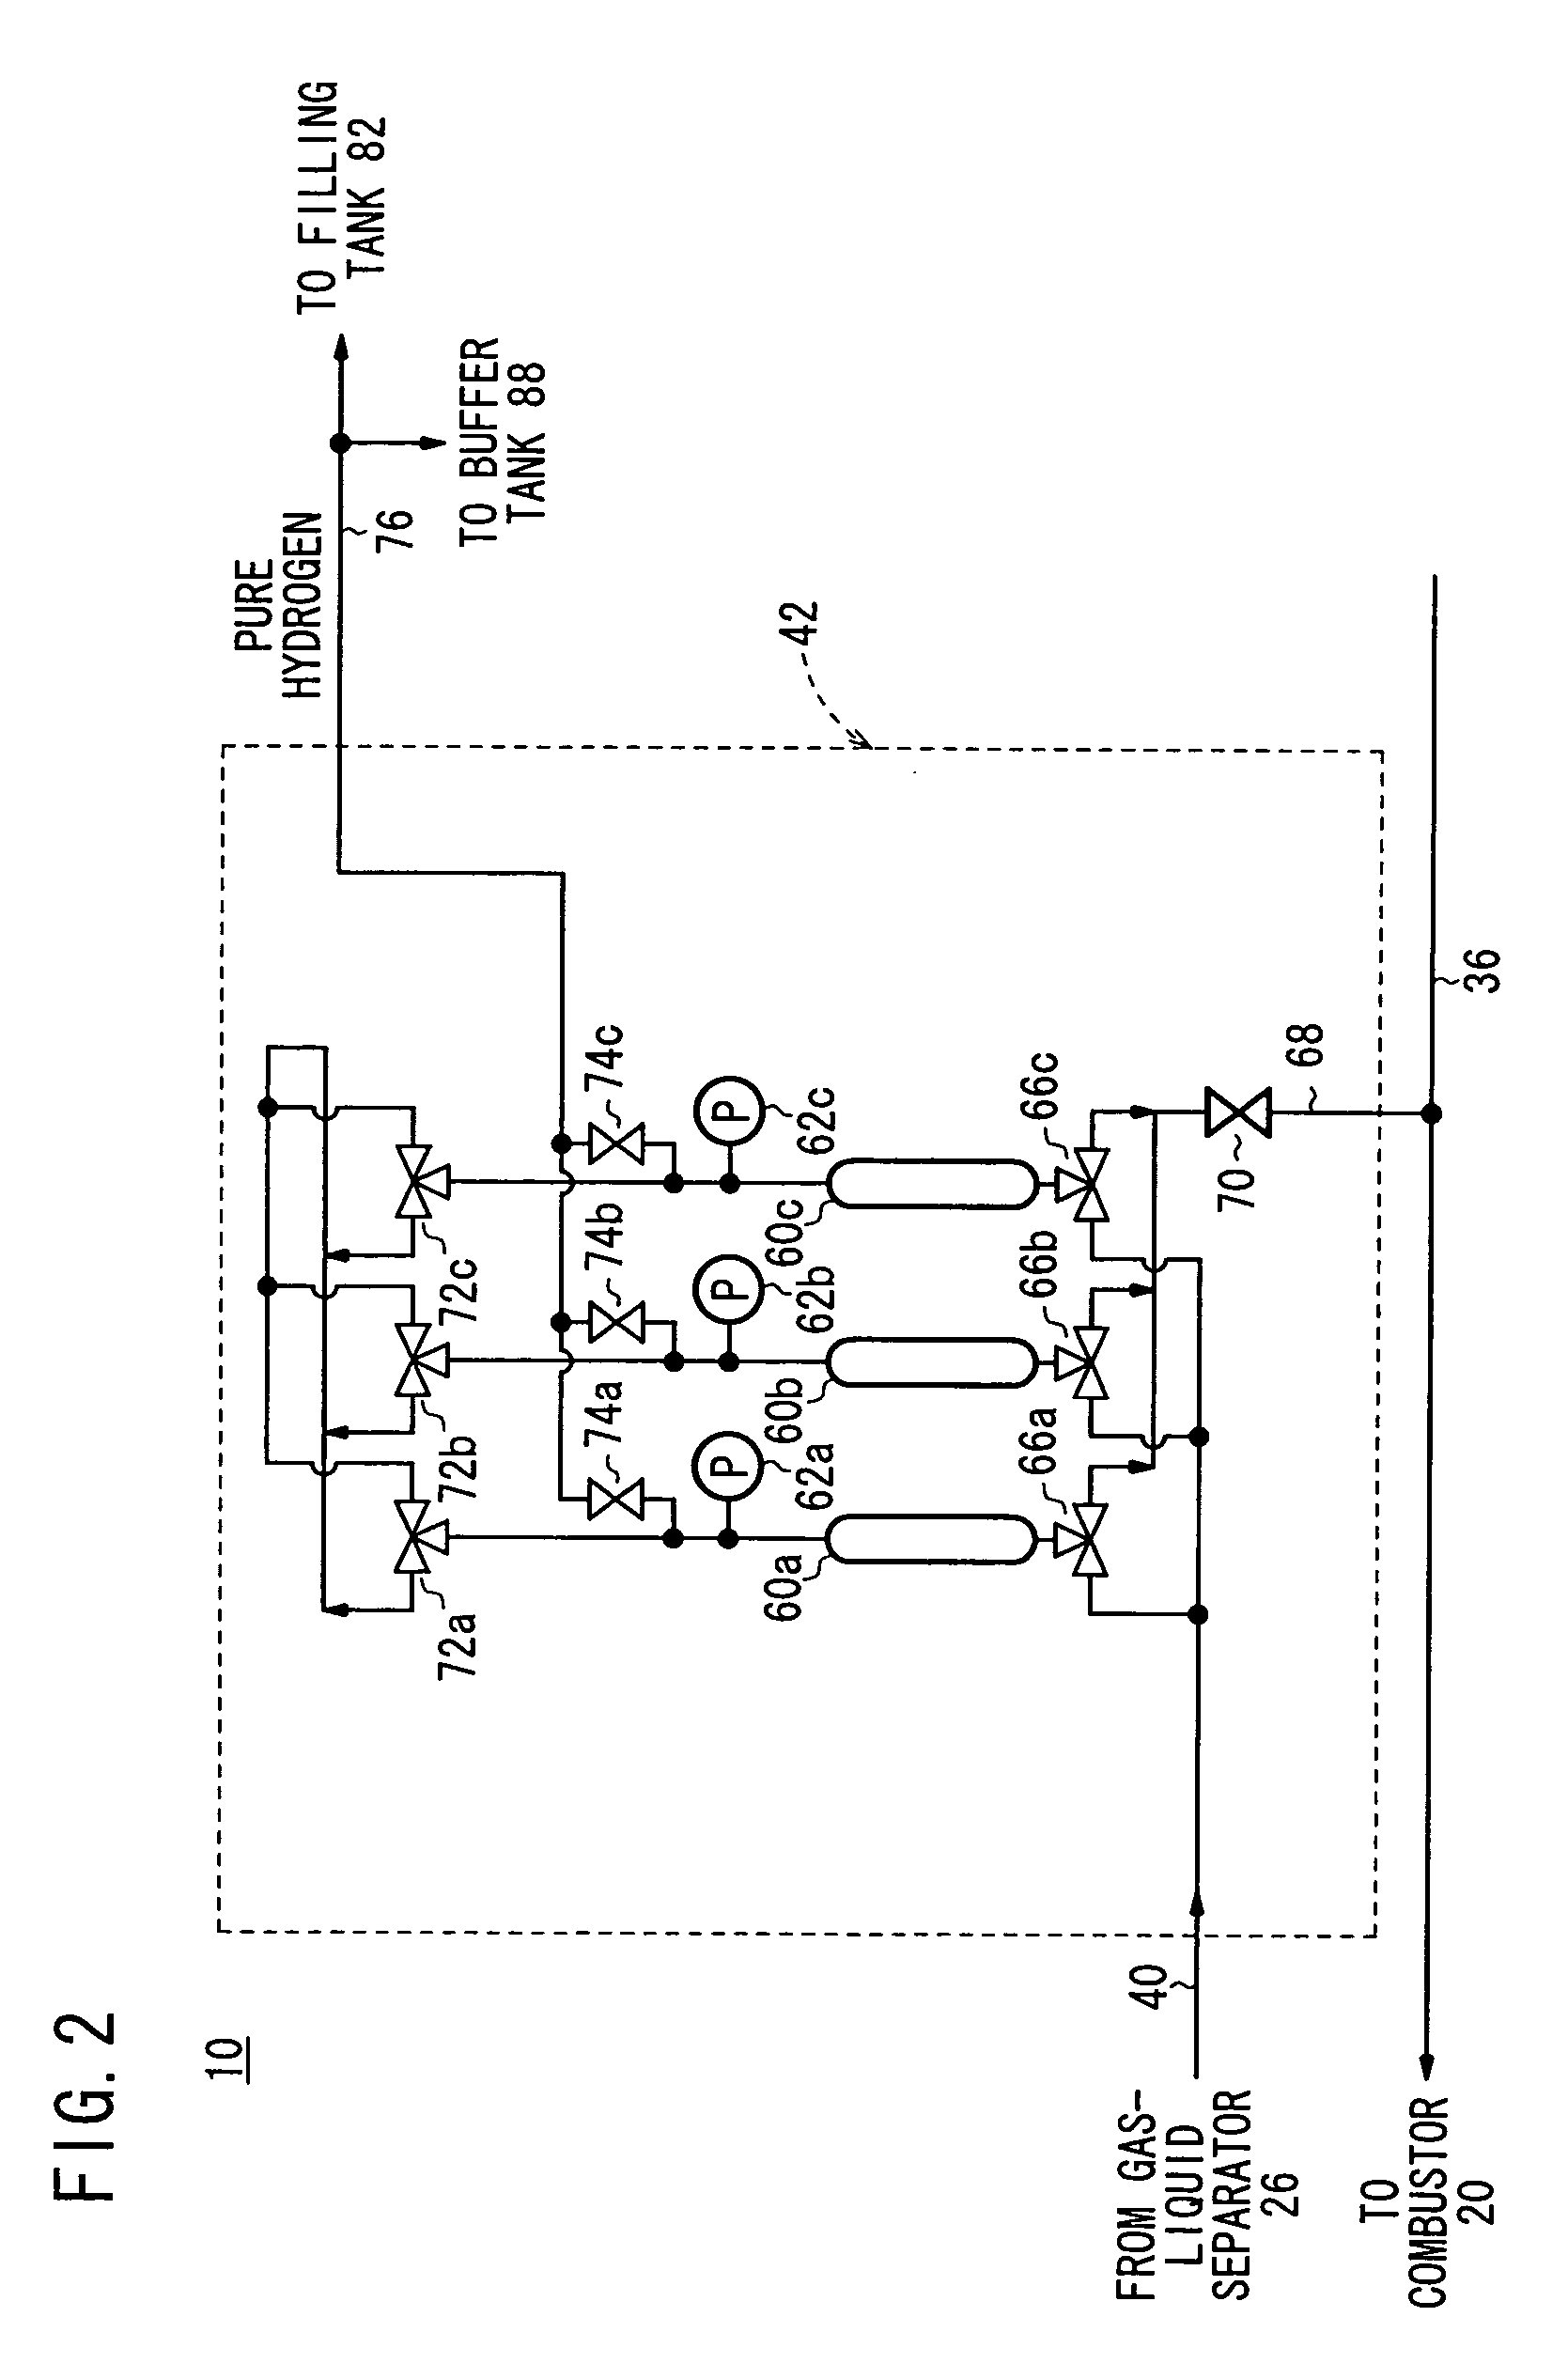 Method of shutting off fuel gas manufacturing apparatus